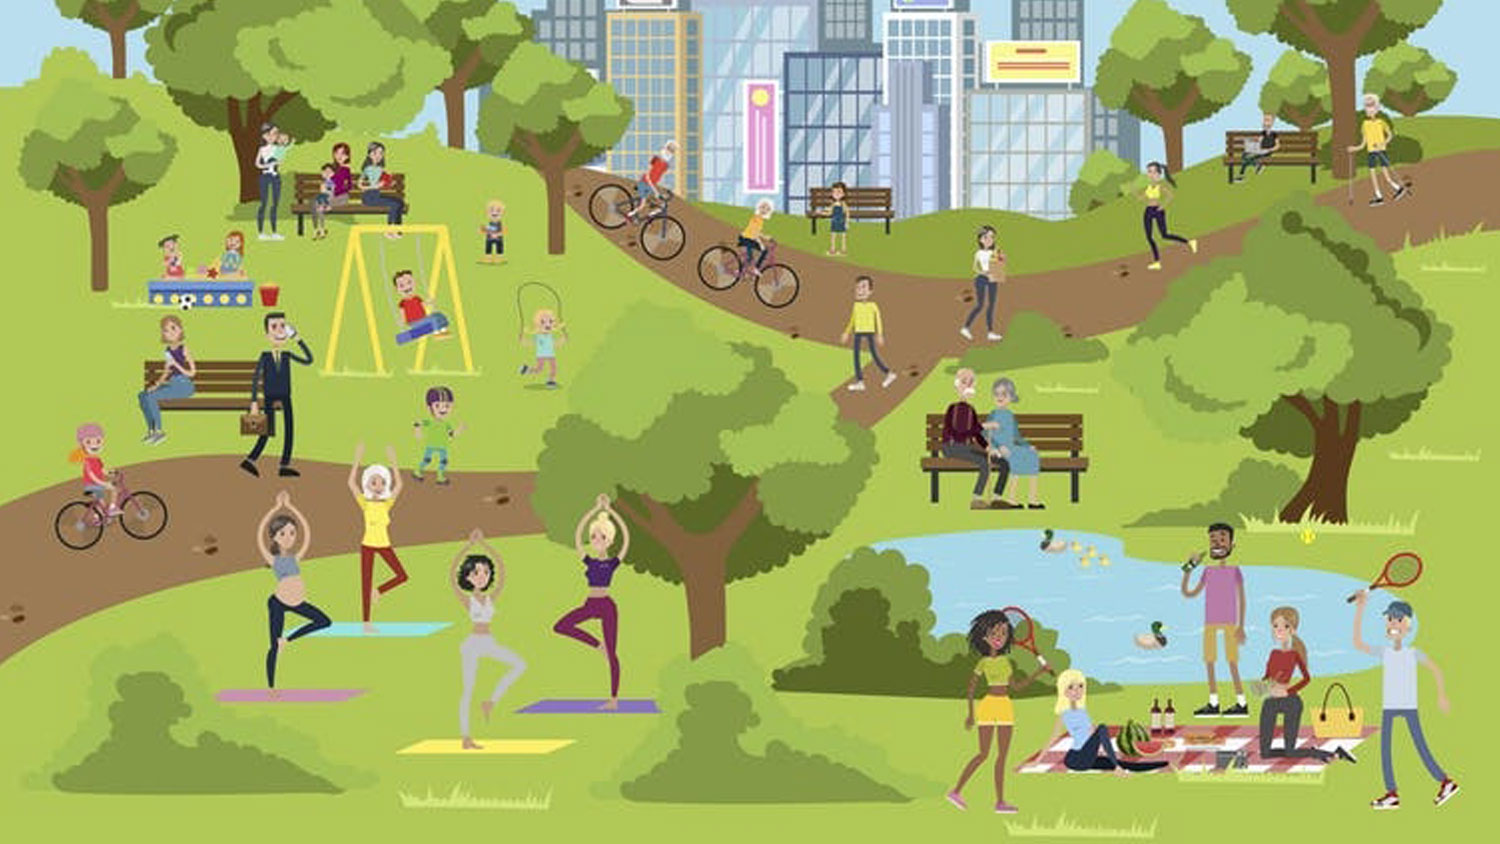 Parks with People Animation - Can Parks Help Cities Fight Crime? - Parks Recreation and Tourism Management NC State